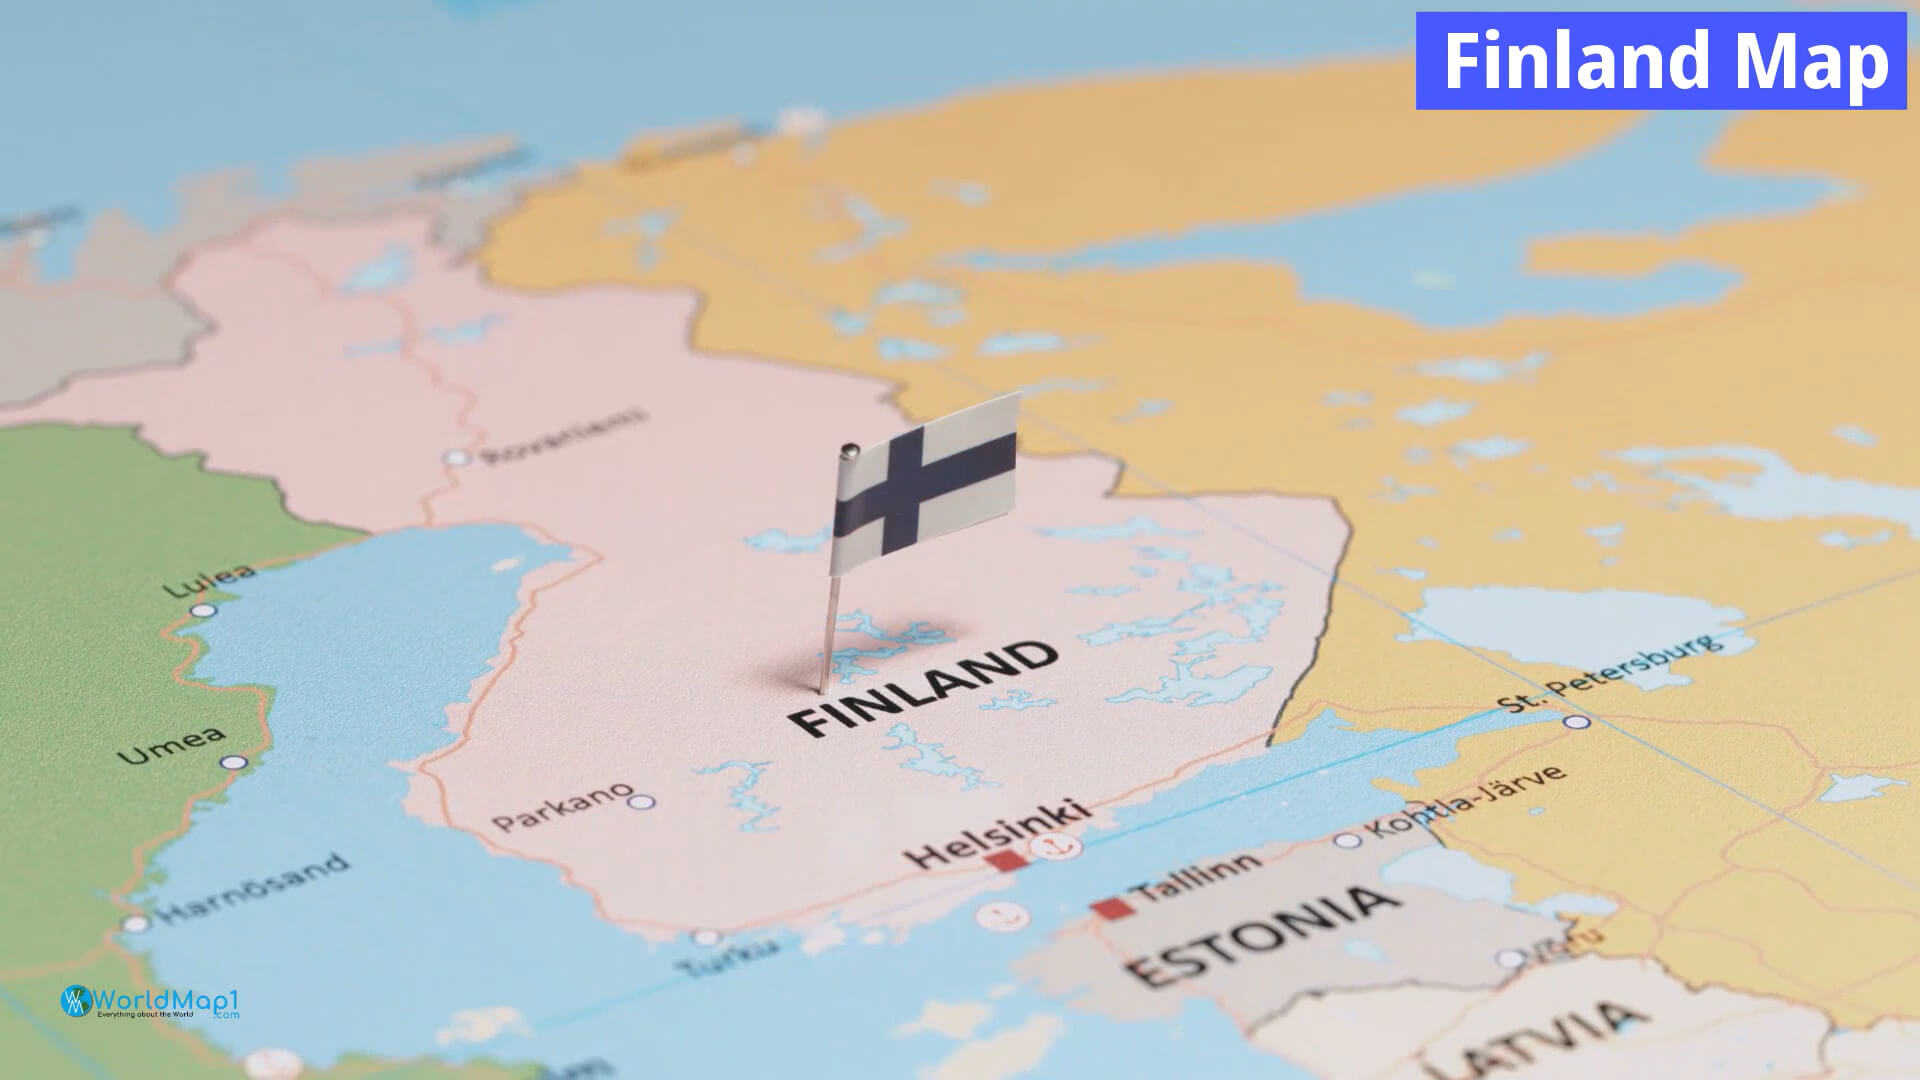 Finland Map in English